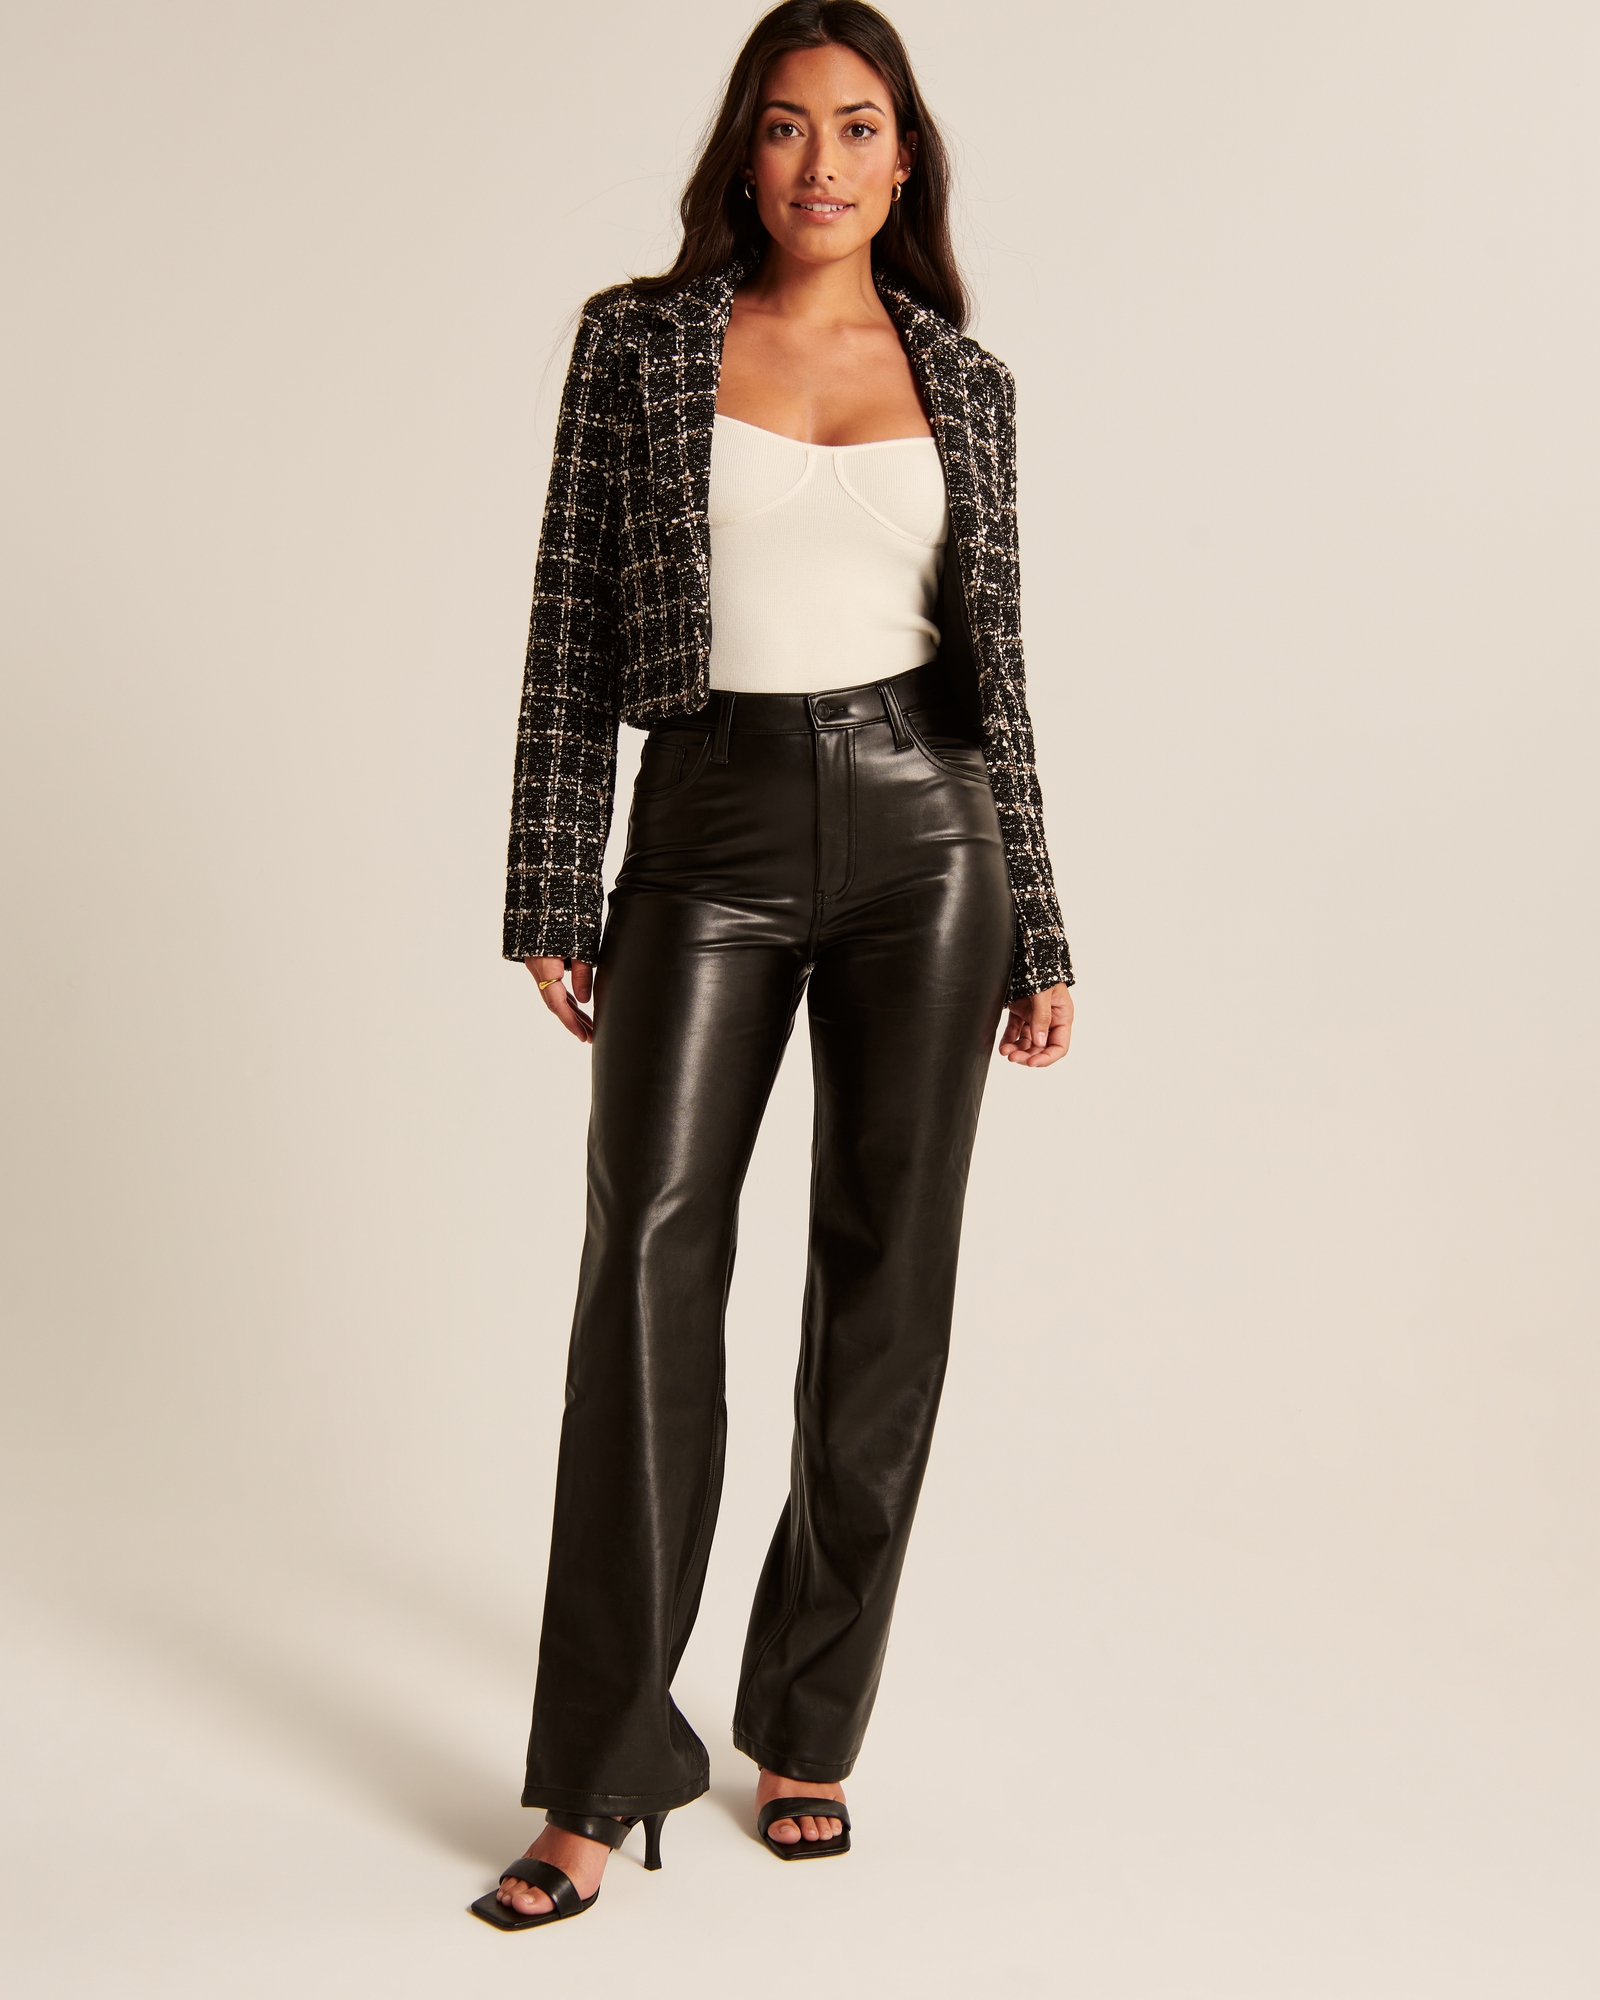 I'm a size XL and did a faux leather pants haul from Abercrombie - my  boyfriend rated each look